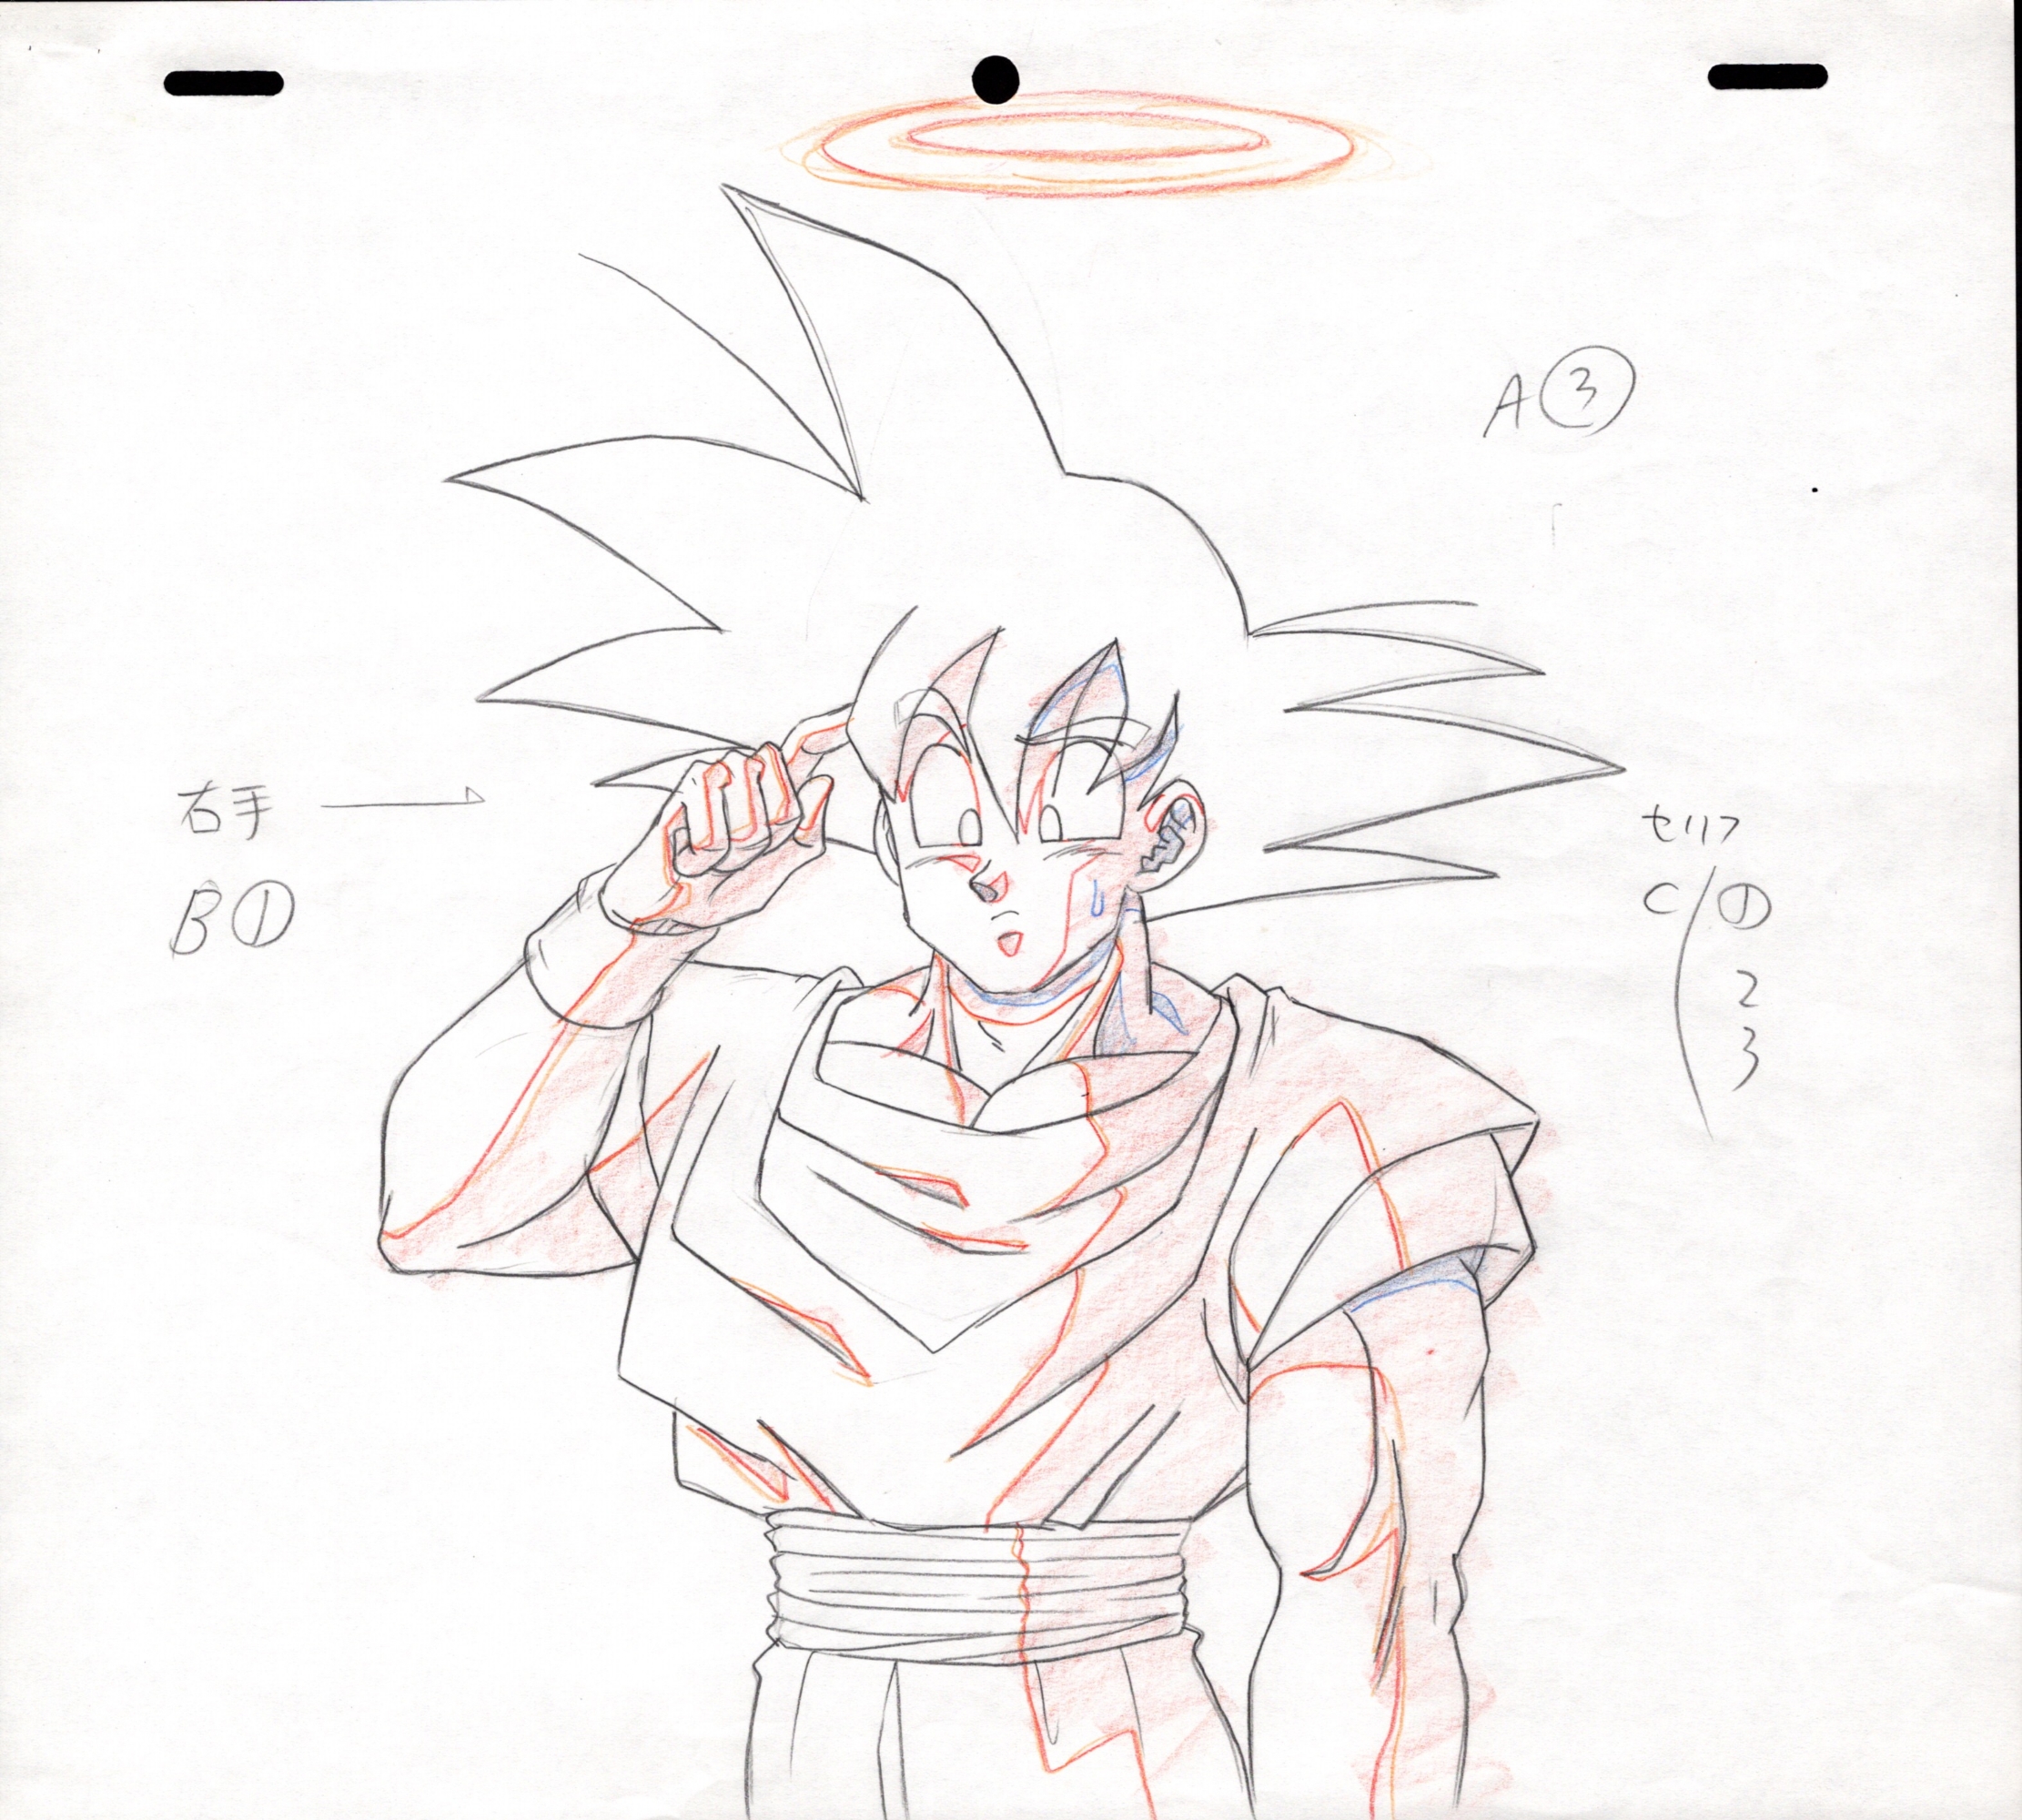 Dragon Ball Z Goku Animation Sketch, in Morgan Fisher's Anime Cels/Sketches  Comic Art Gallery Room